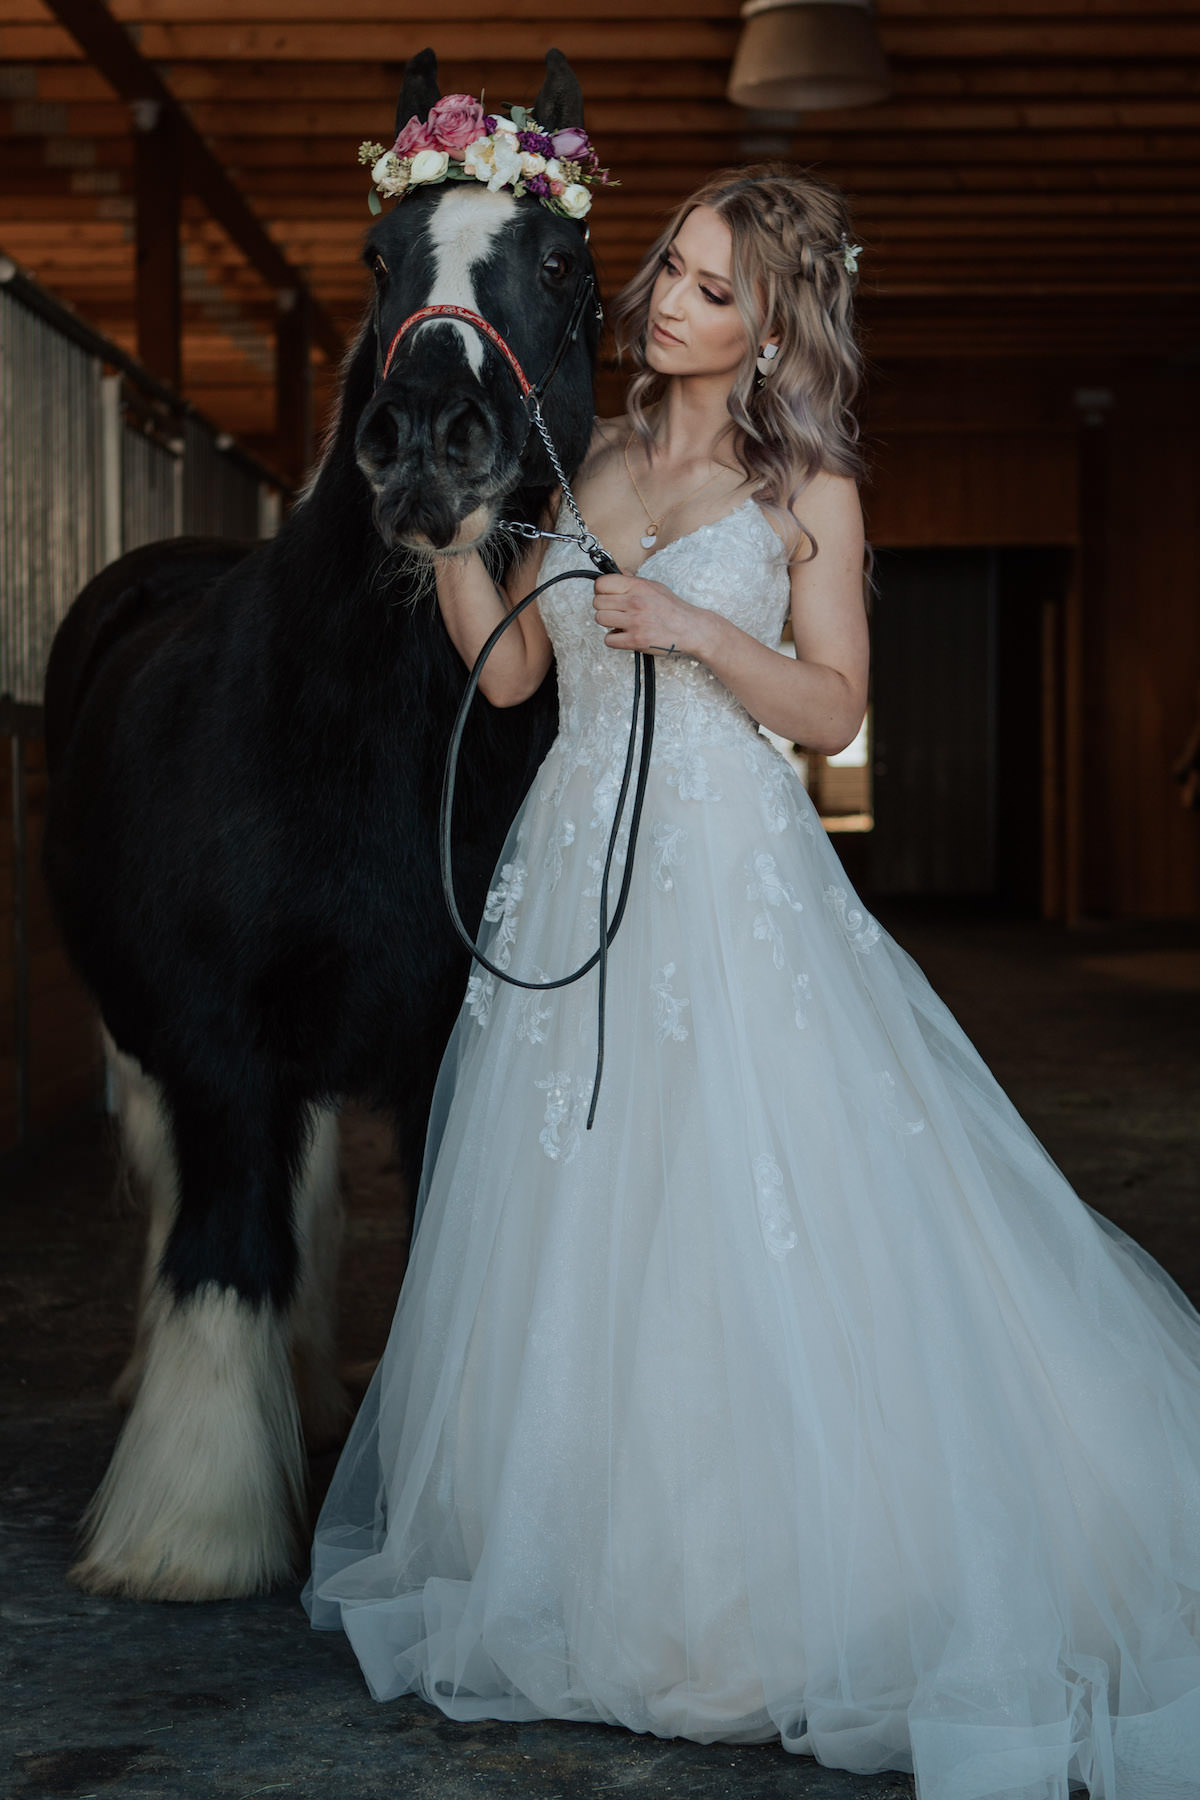 Bride and horse photo - Lauren Finch Photography